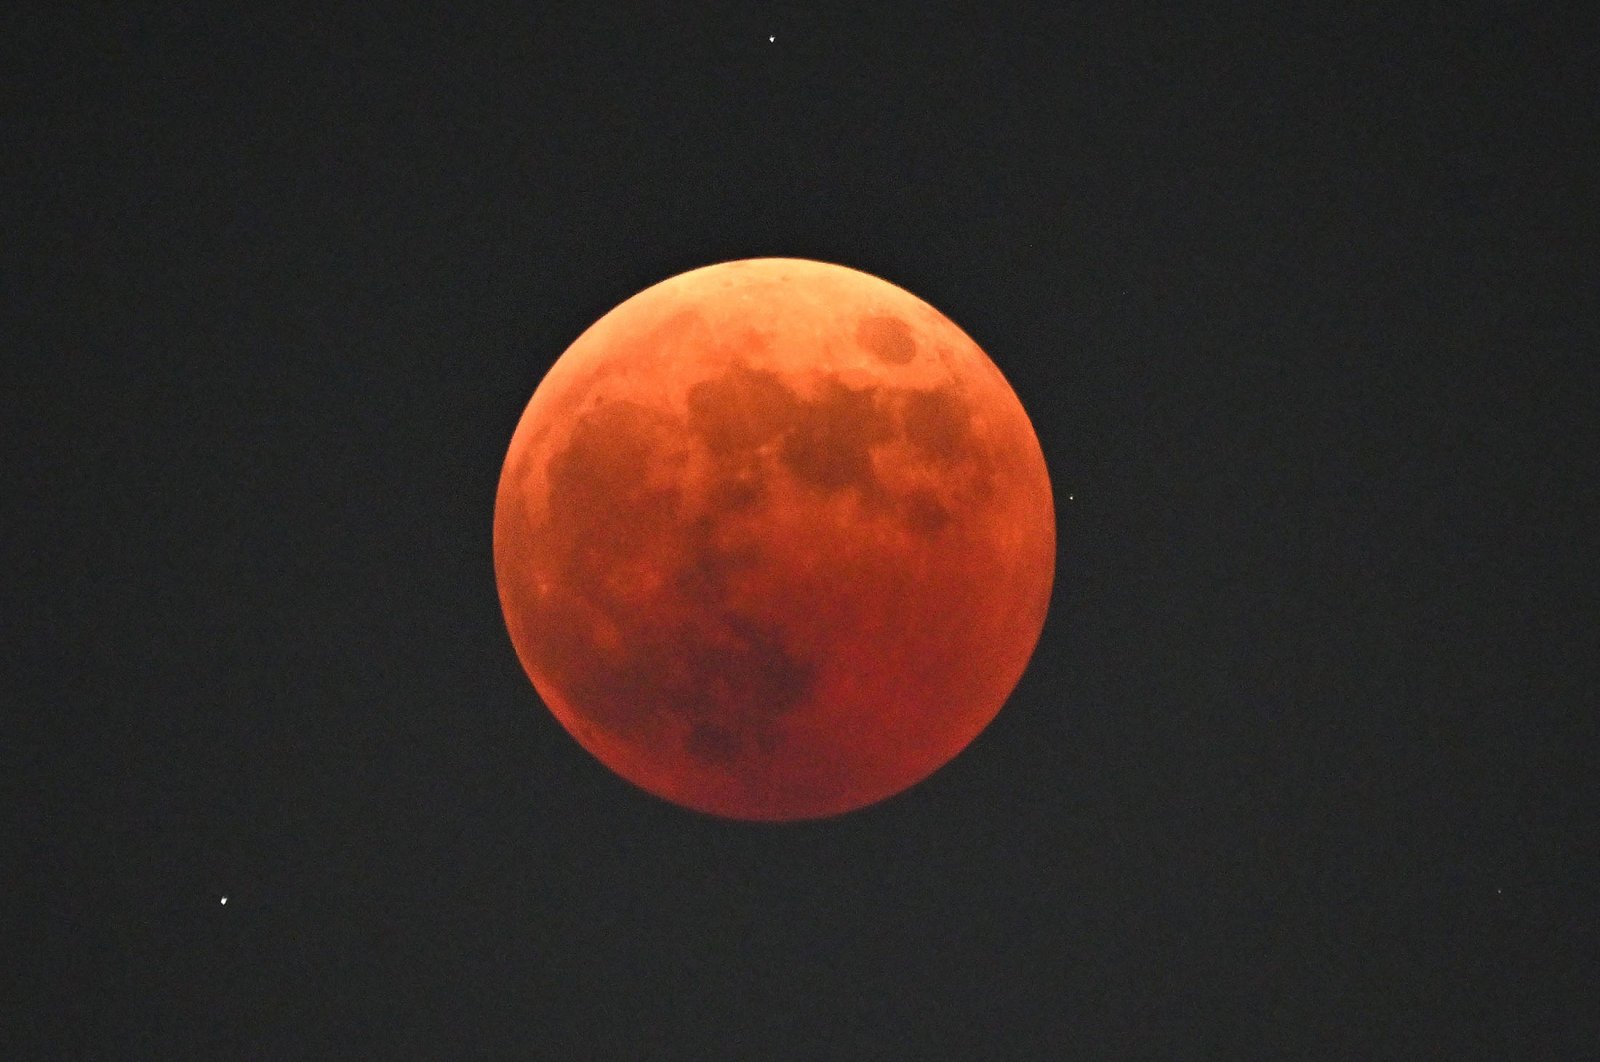 The blood moon is seen during a total lunar eclipse in Goyang, northwest of Seoul, South Korea, Nov. 8, 2022. (AFP Photo)